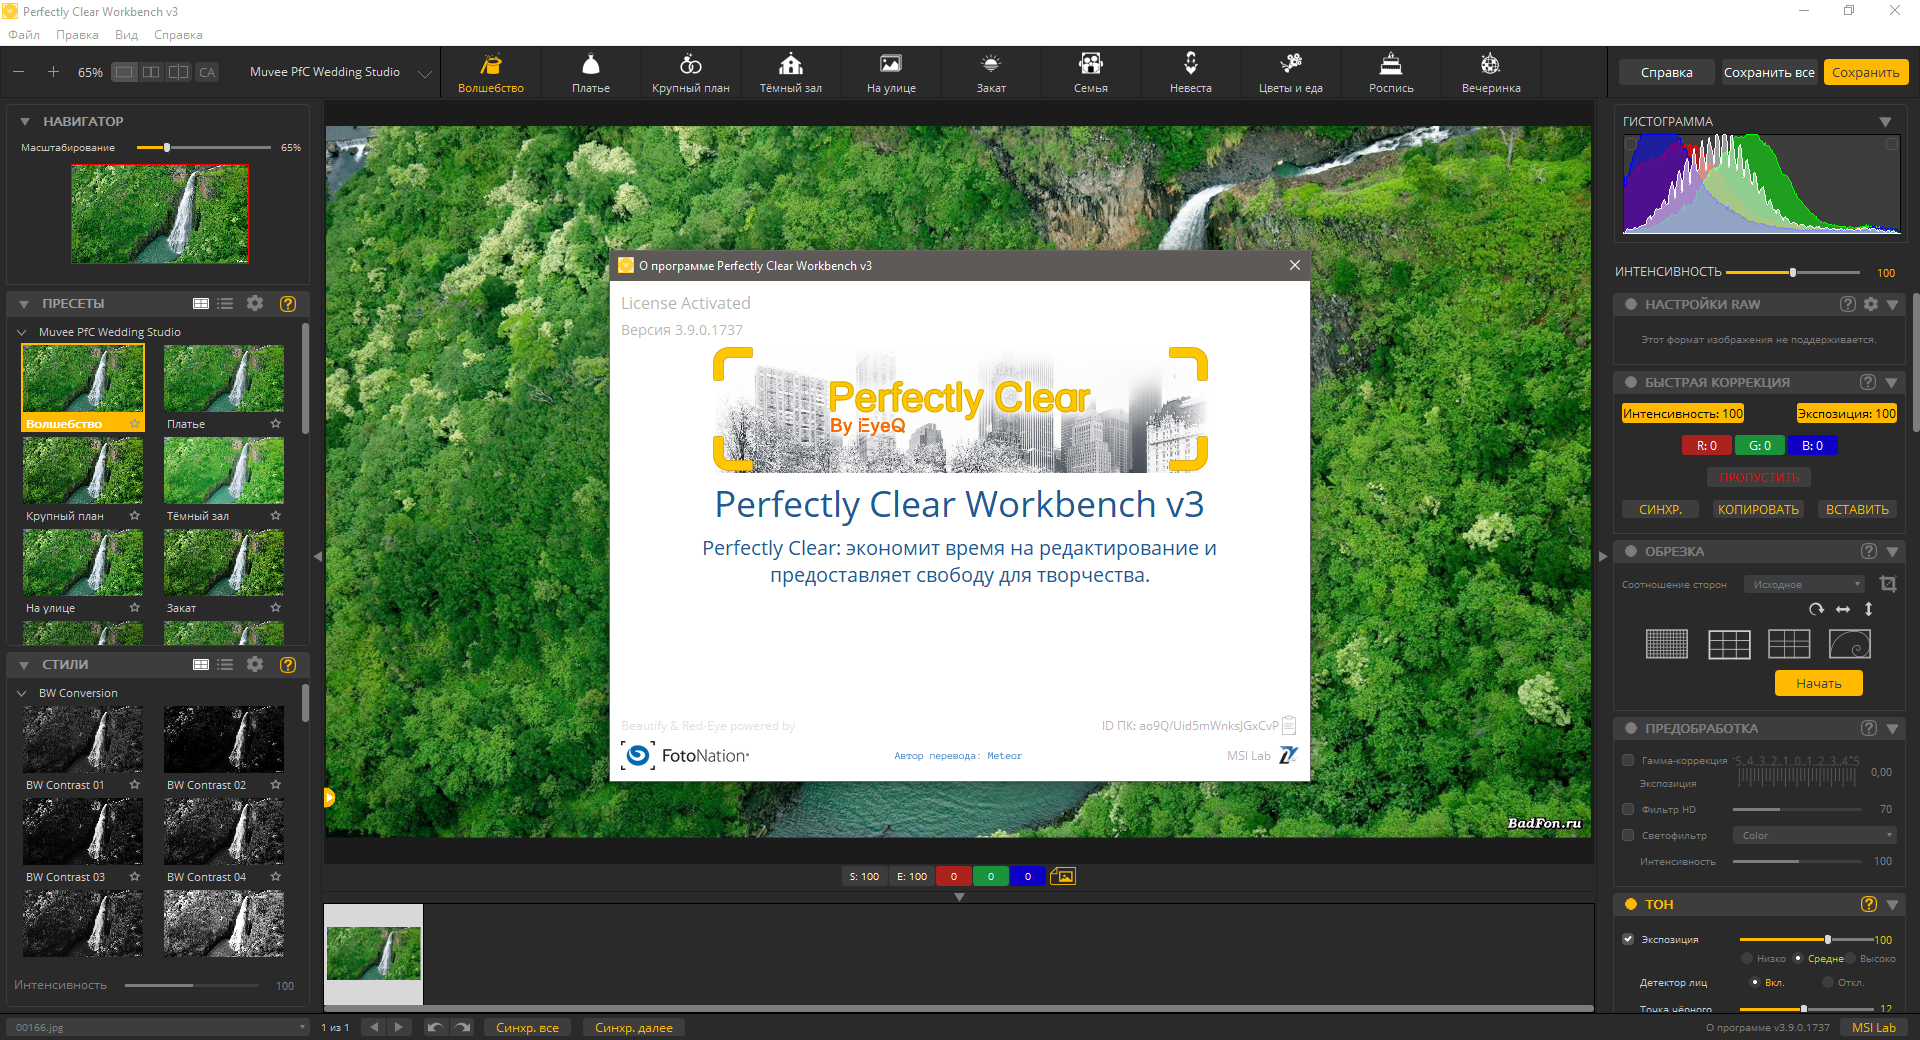 Perfectly Clear WorkBench 4.6.0.2570 instaling